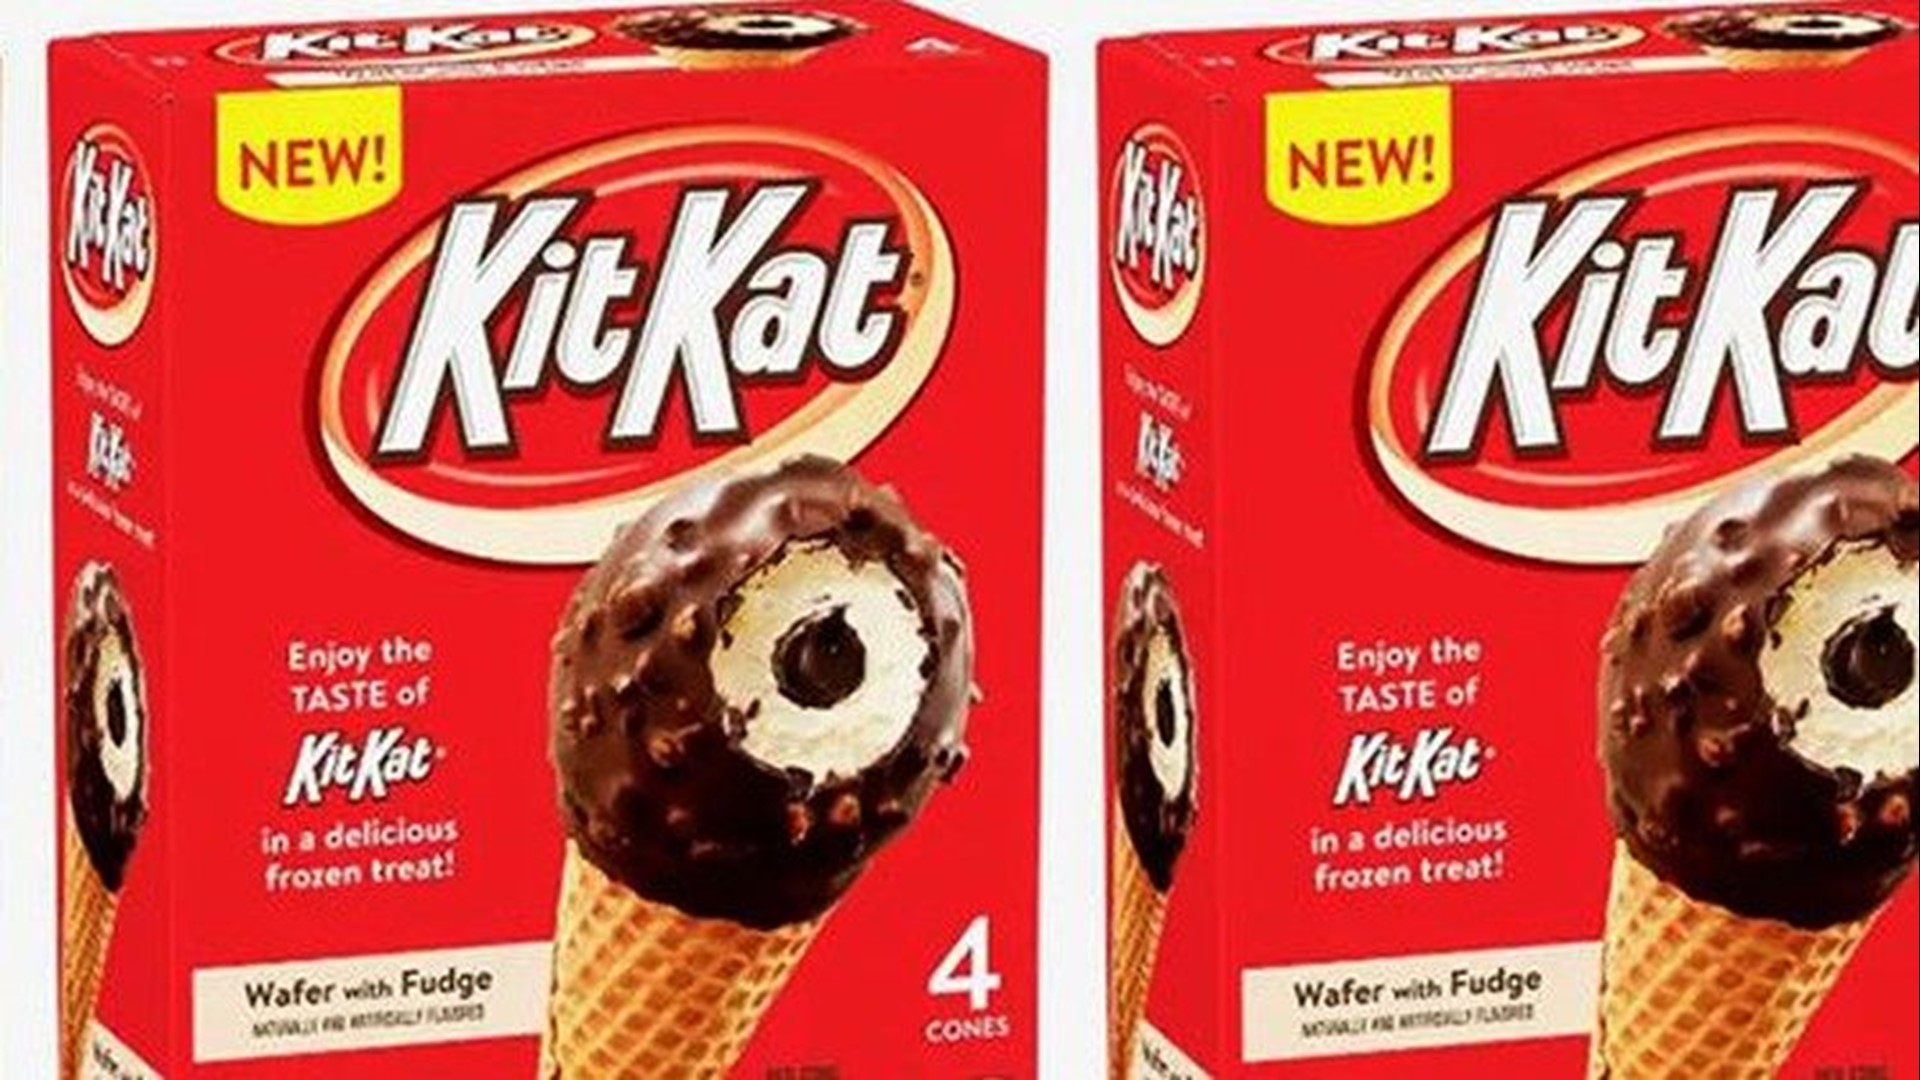 New Kit Kat Drumsticks Have Ice Cream Wafer Pieces And A Fudge Center